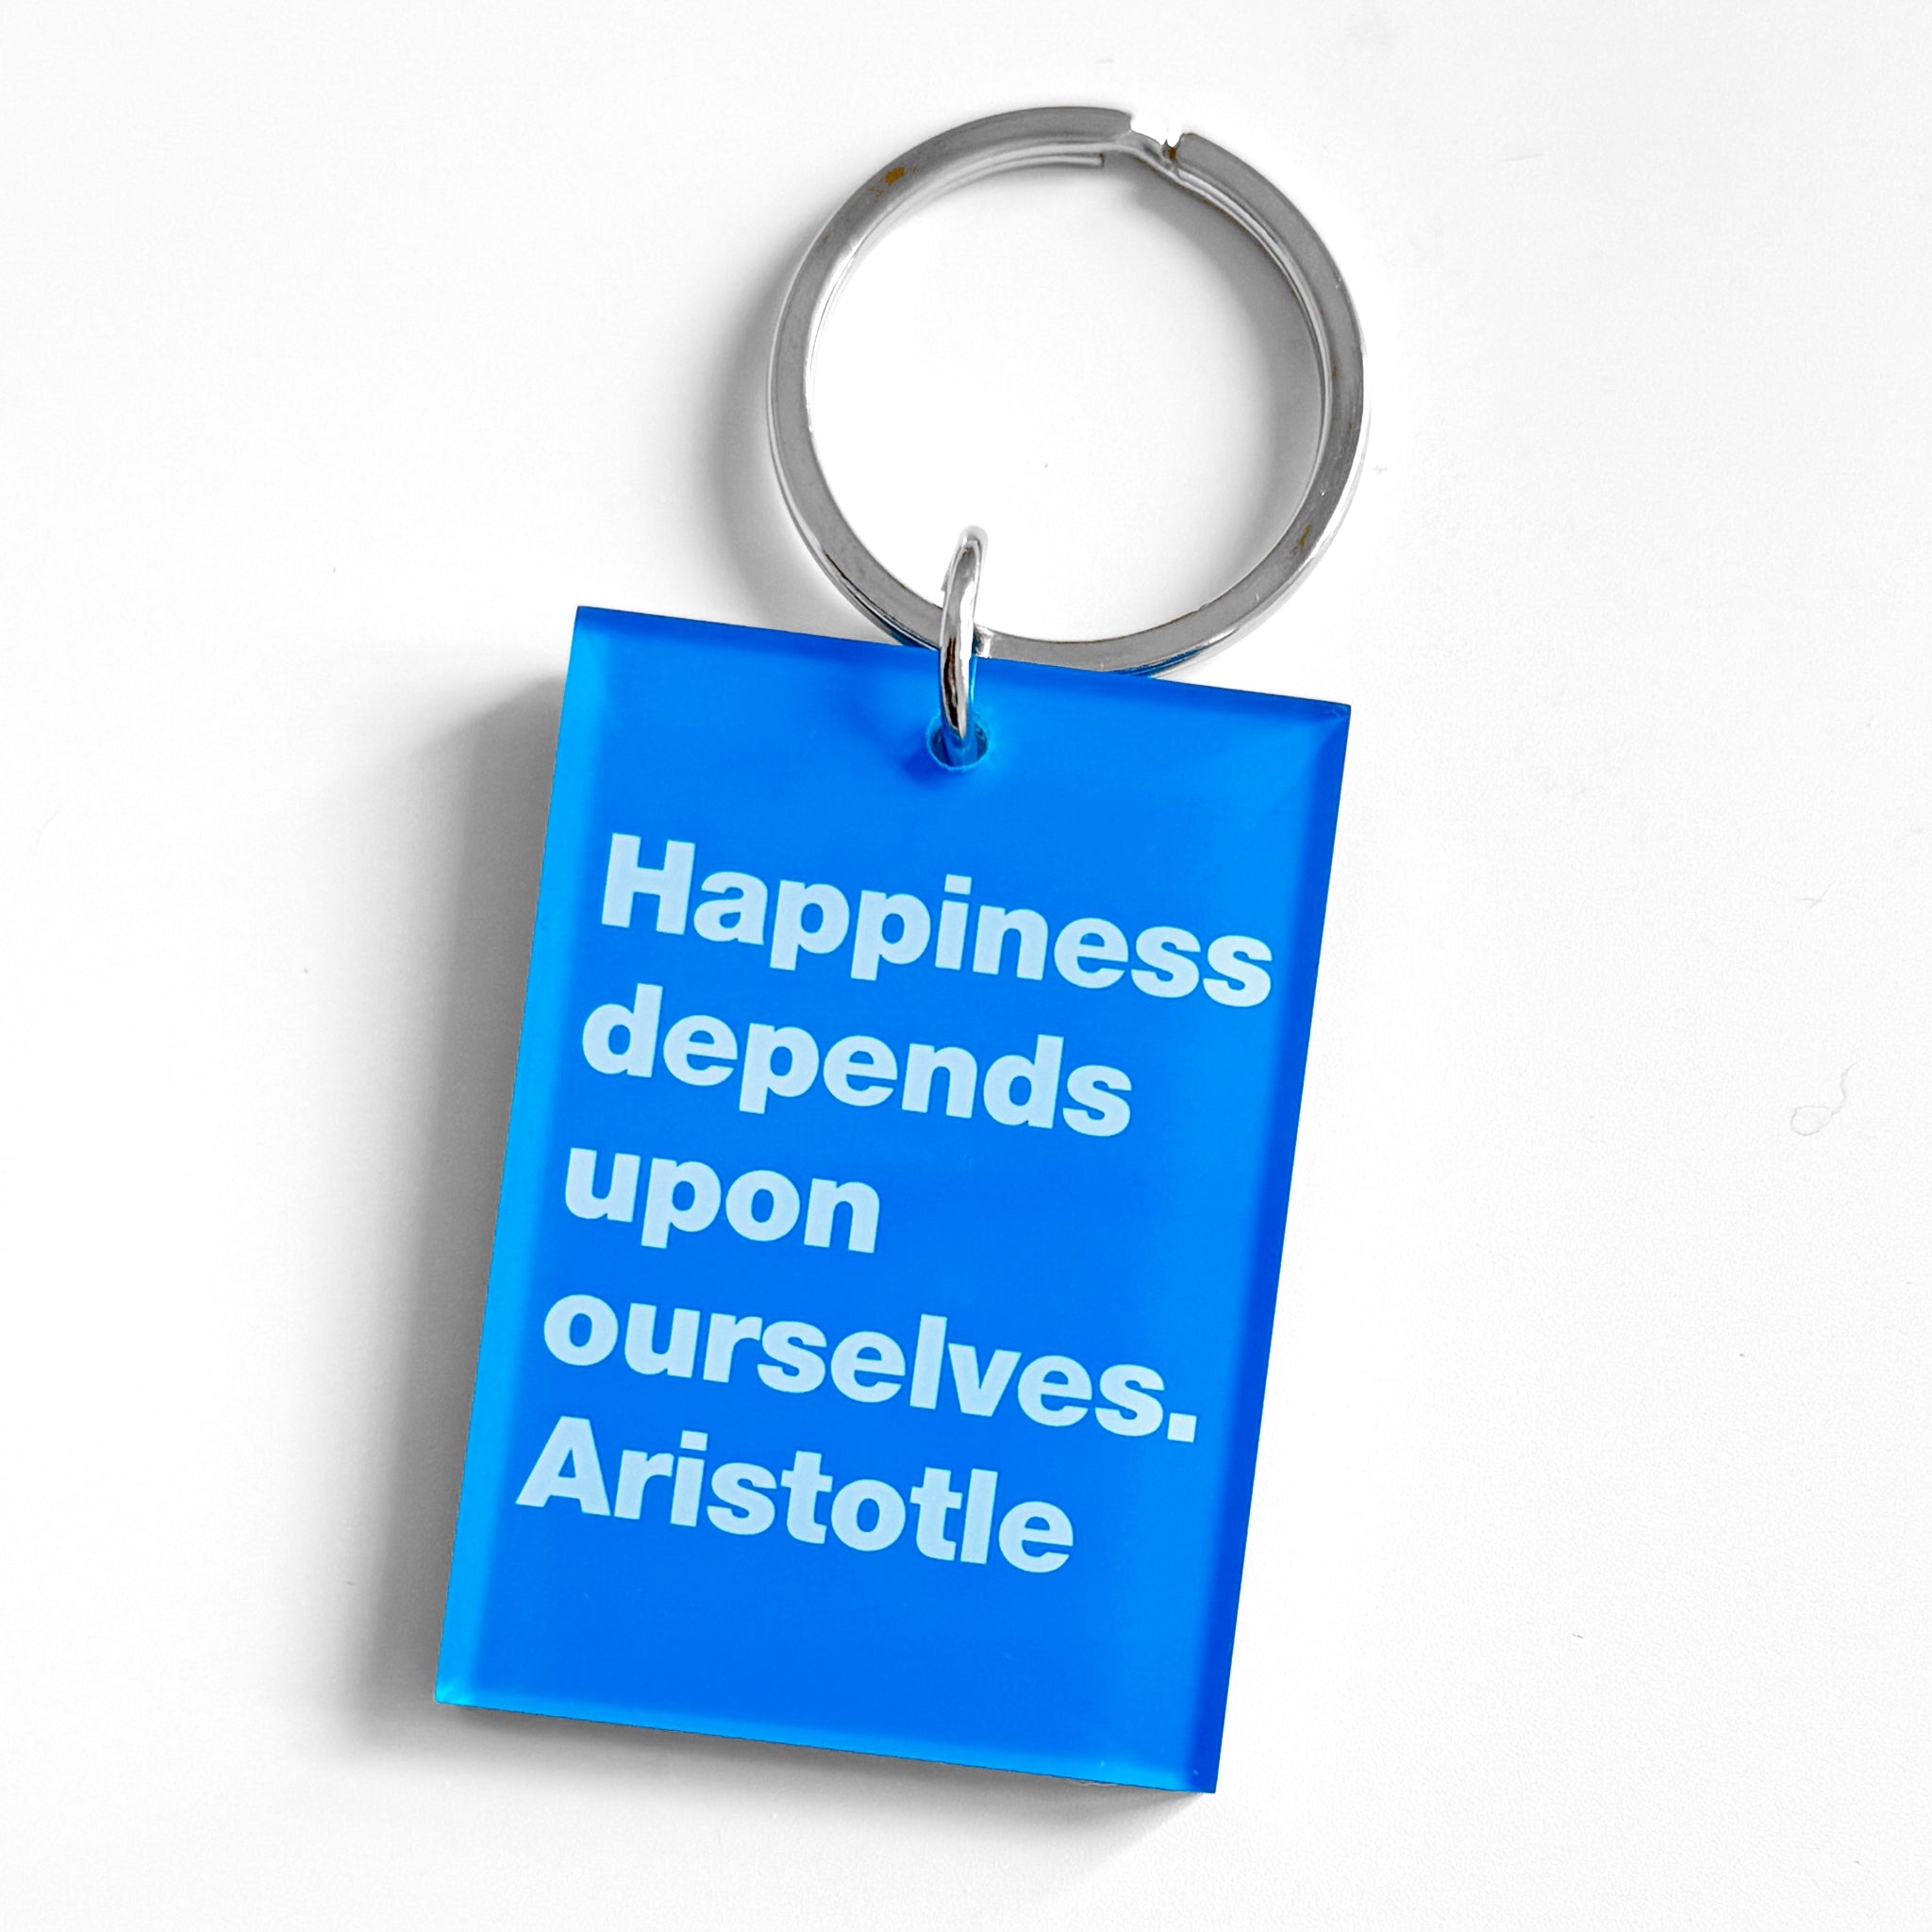 Happiness depends-Aristotle Key Ring